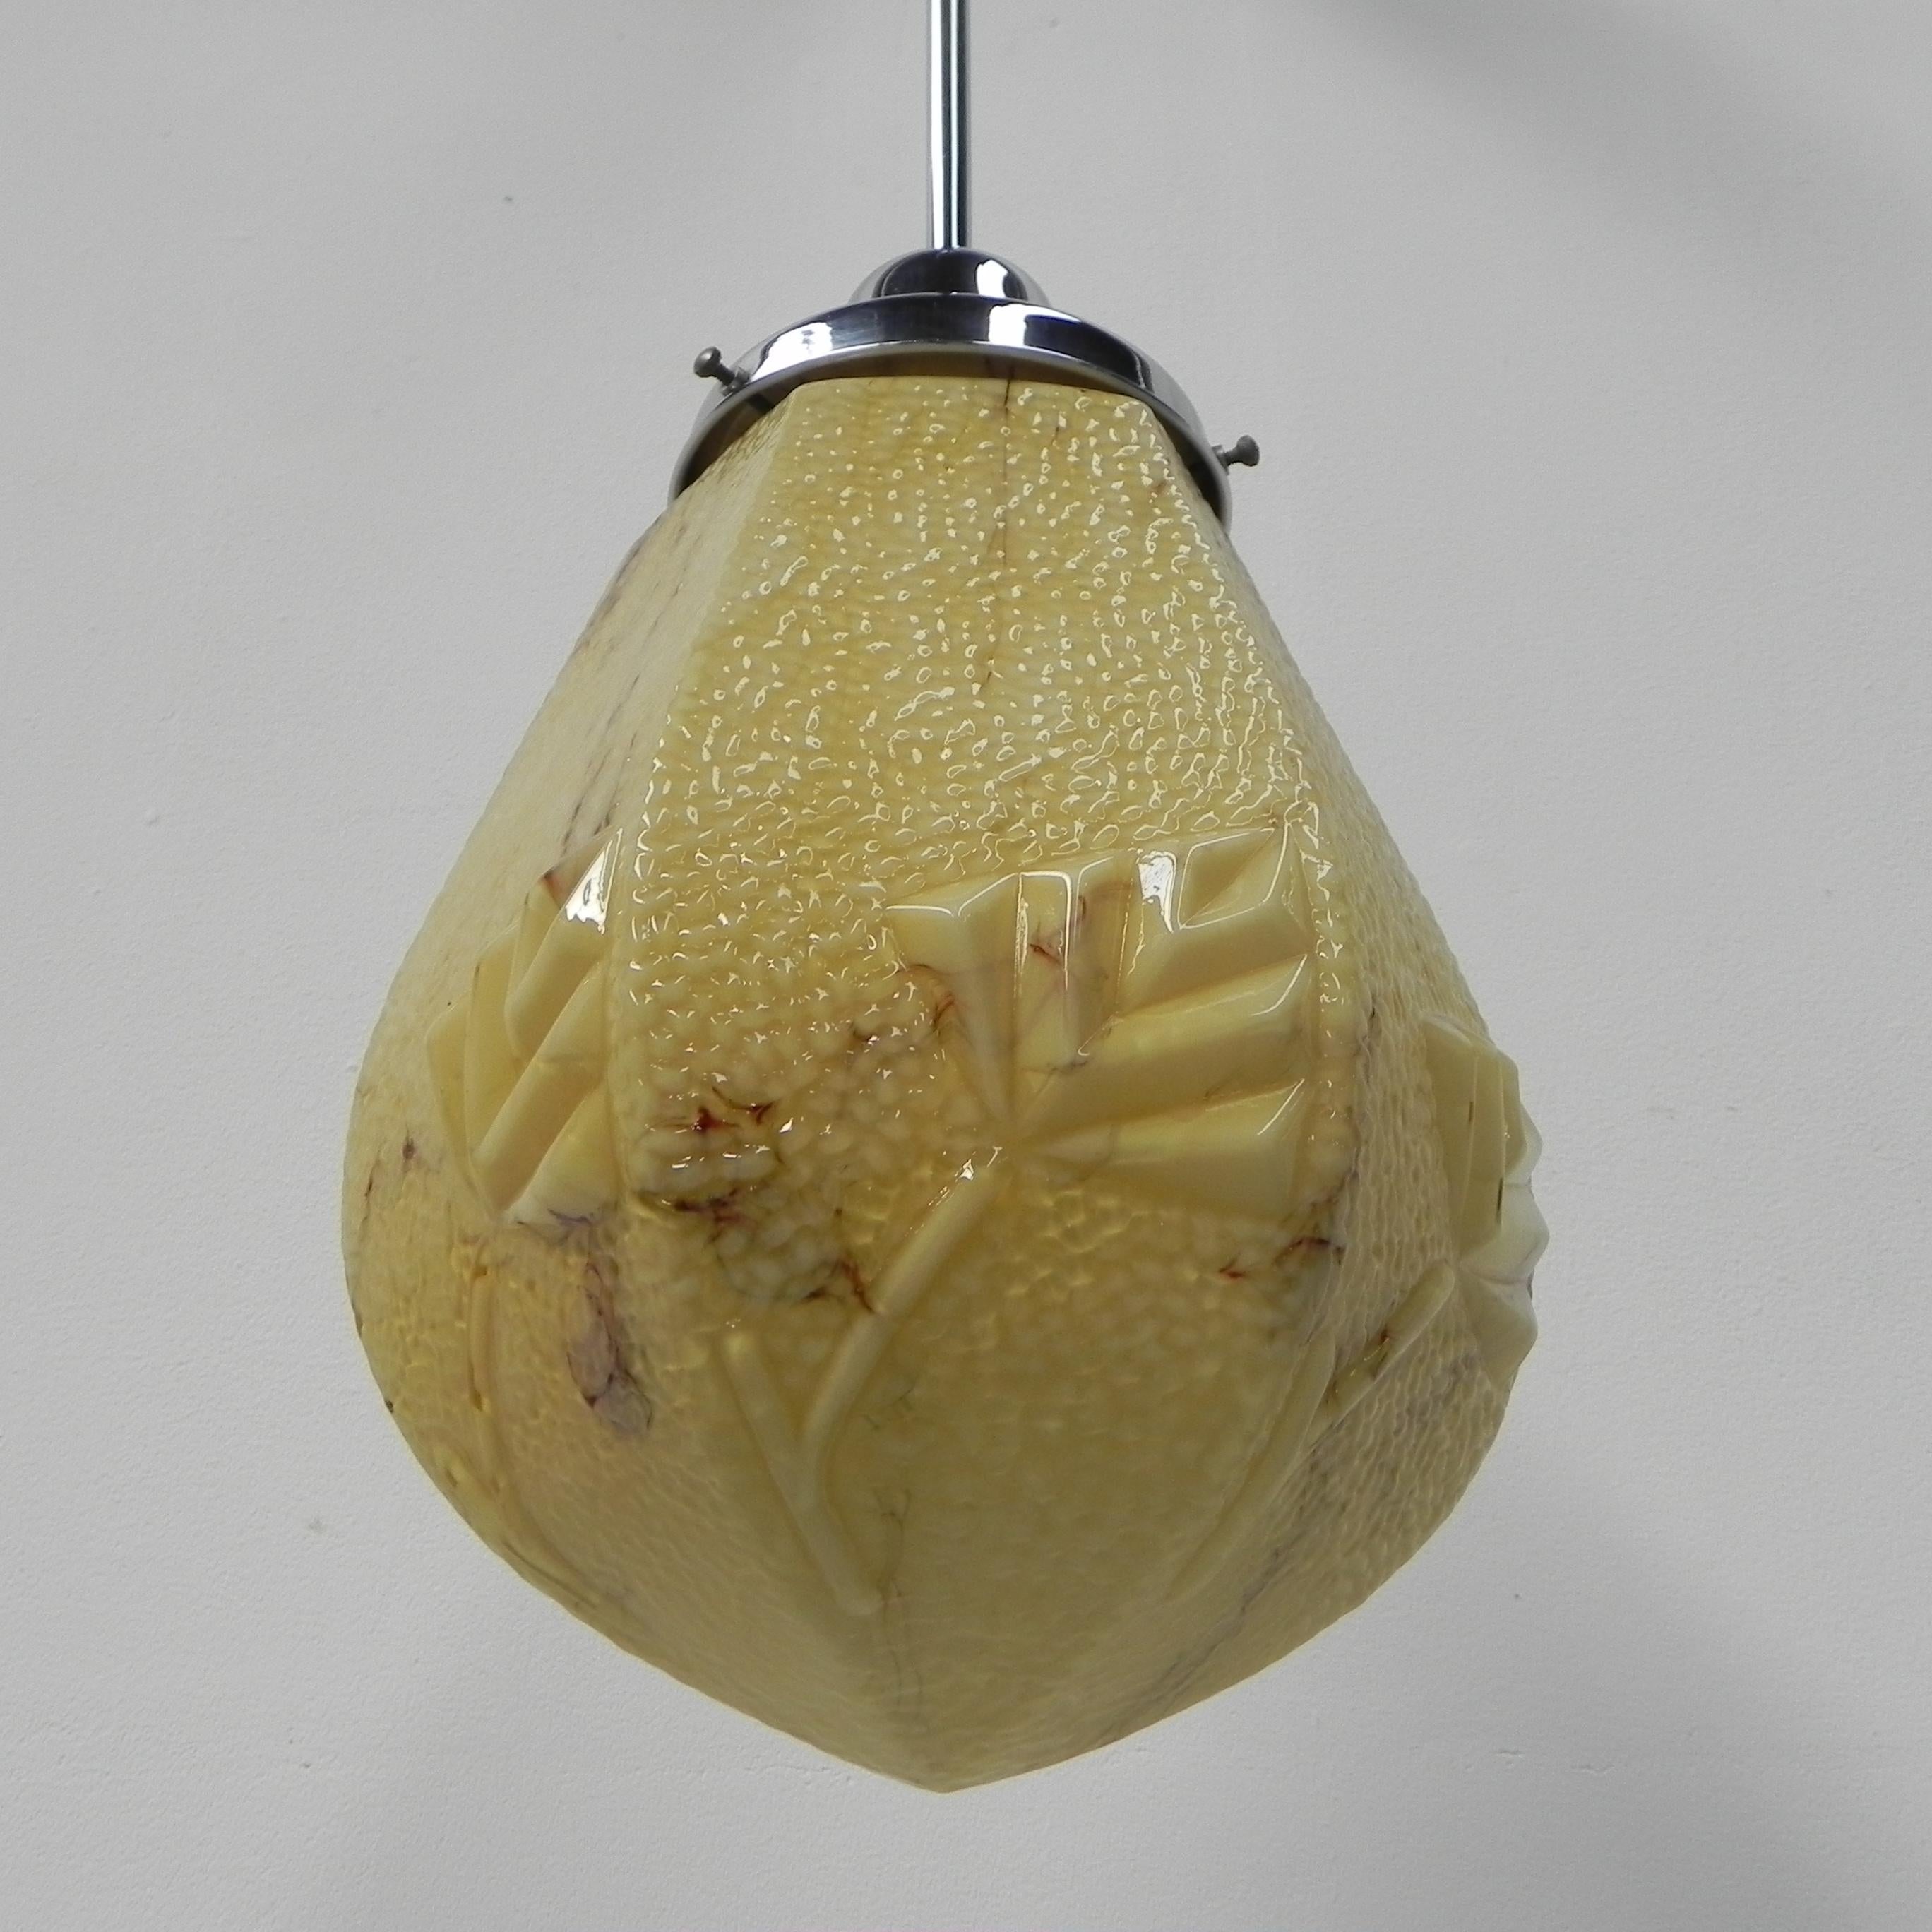 European Art Deco Hanging Lamp with Marbled Hexagonal Shade For Sale